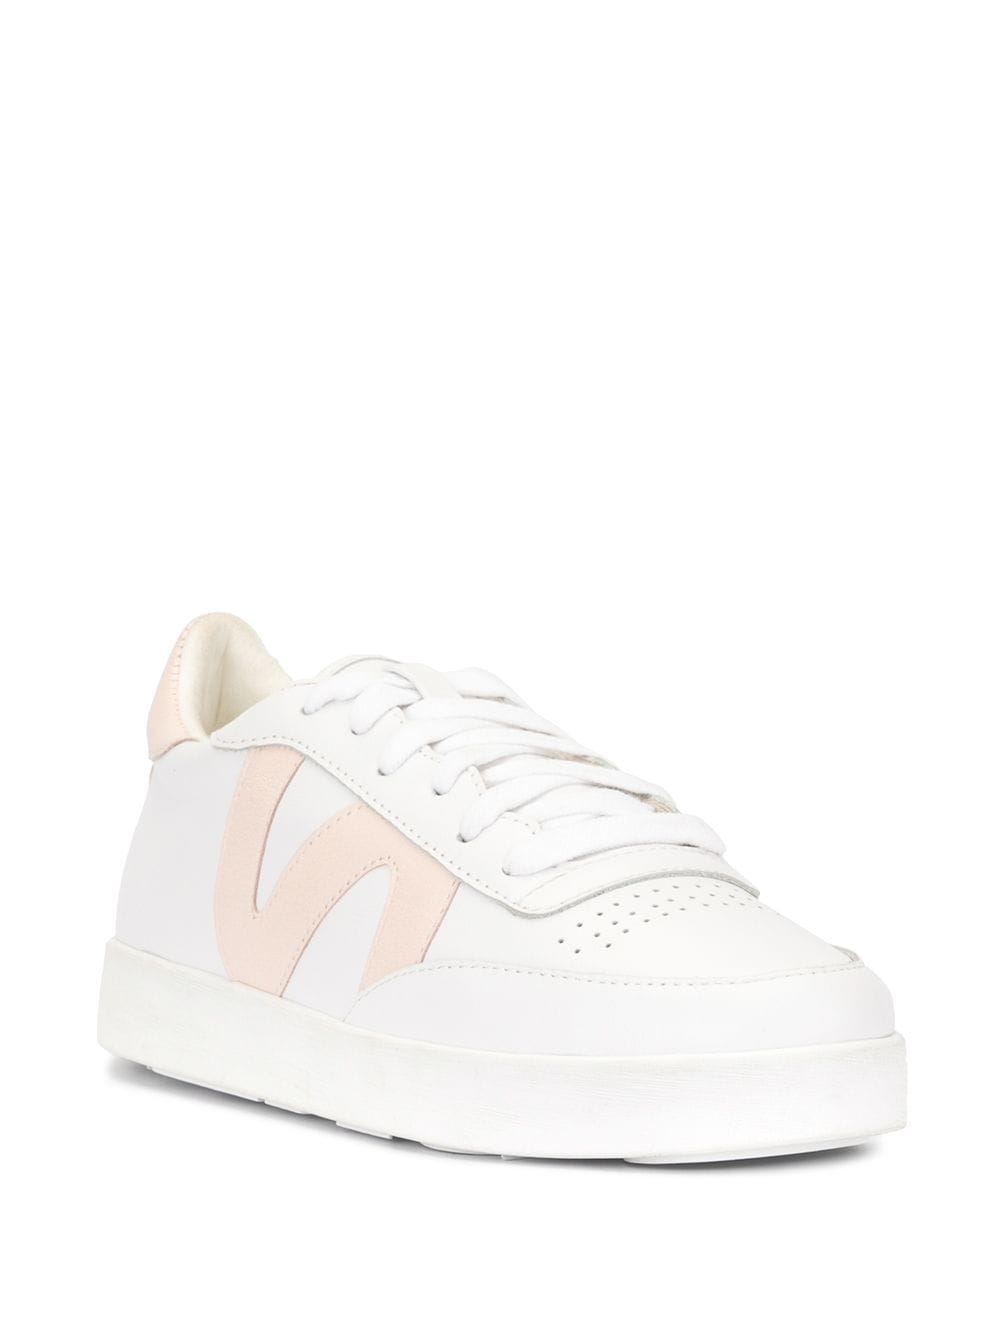 Image 2 of Senso Annabelle sneakers